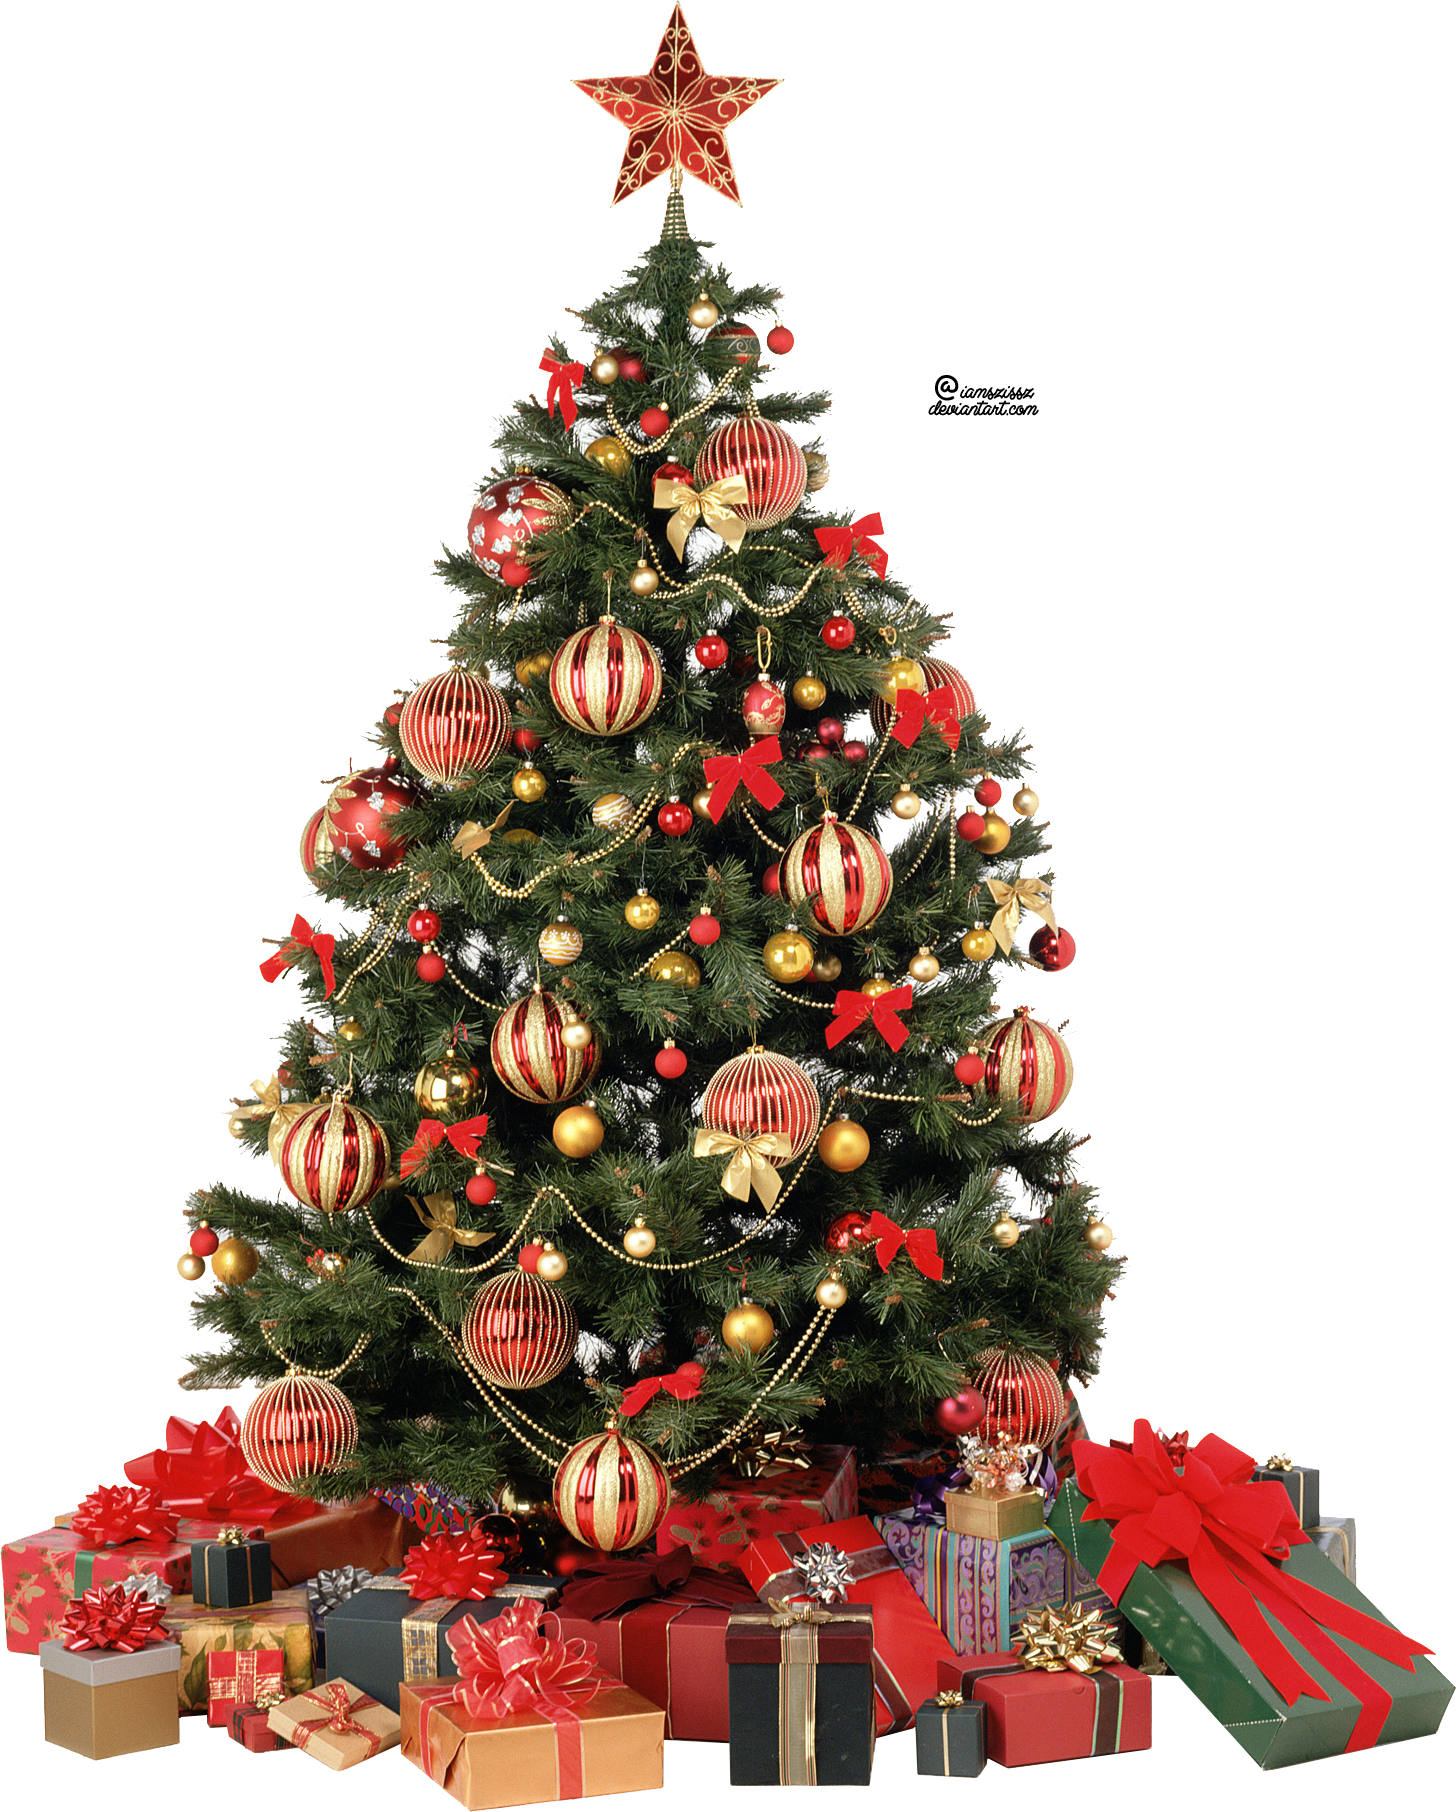 Christmas Tree Picture PNG Image